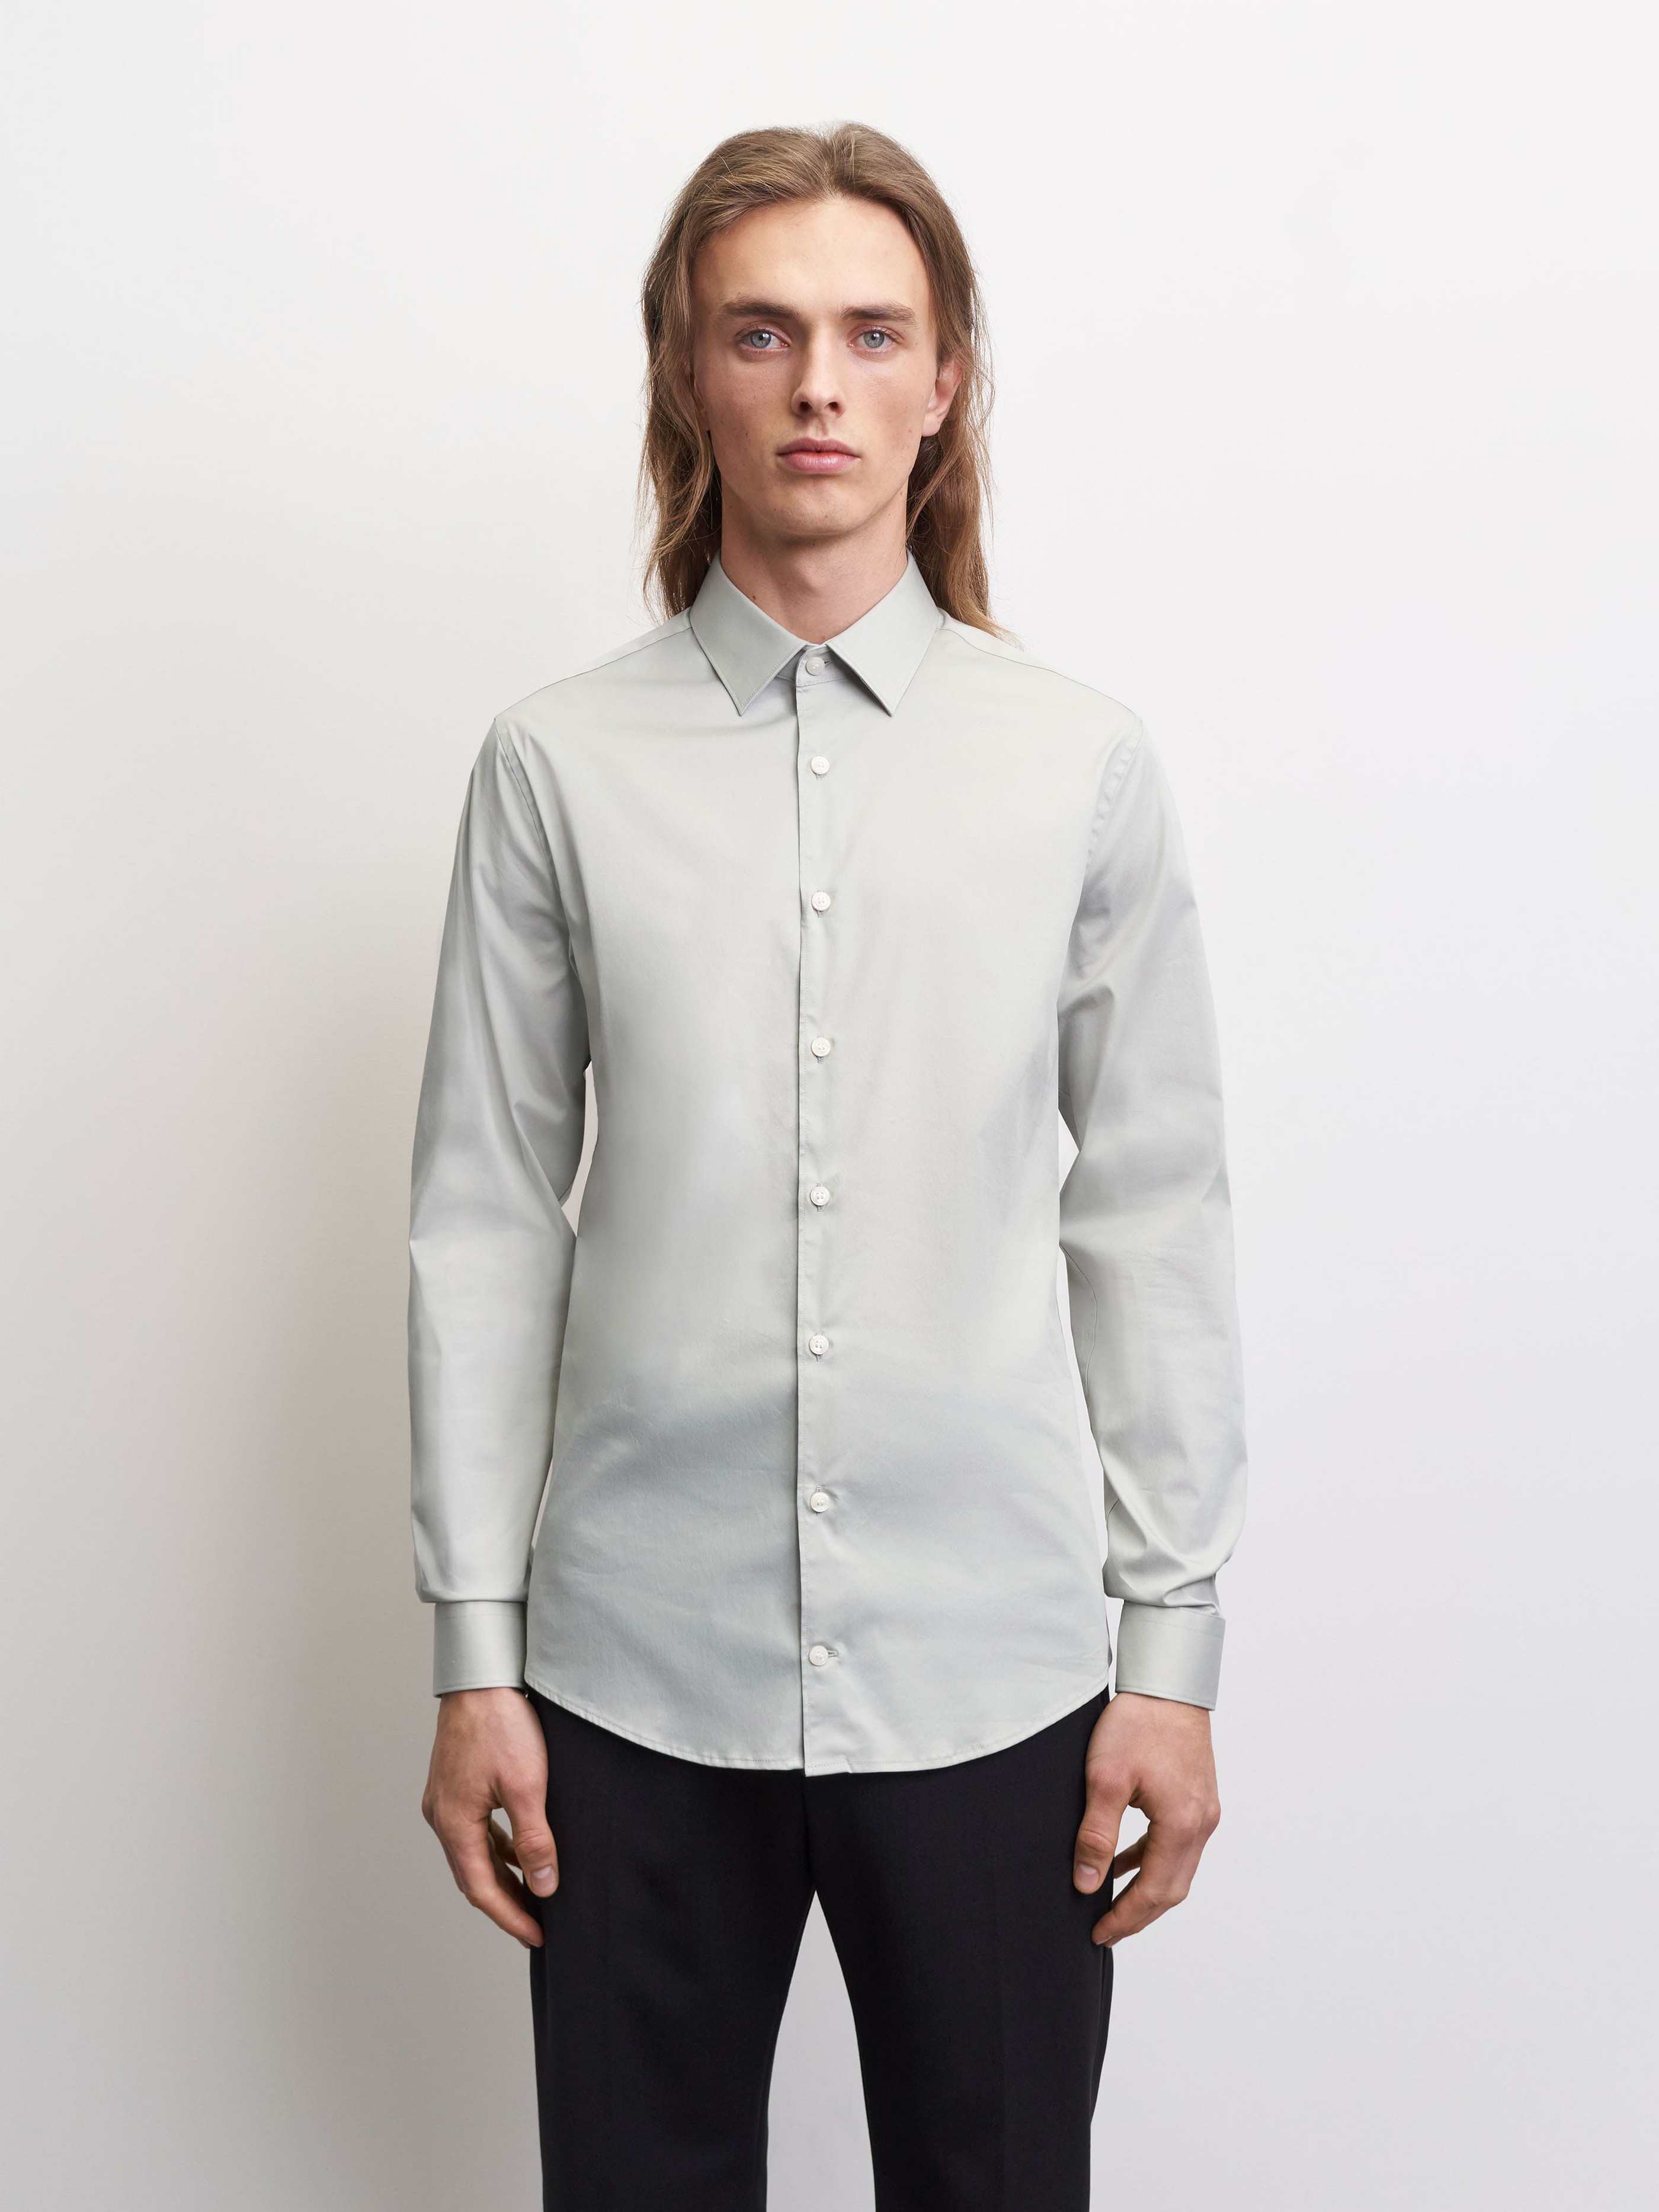 TIGER OF SWEDEN Filbrodie Shirt in Grey T68997029 1Y1-BLUE FOX FROM EIGHTYWINGOLD - OFFICIAL BRAND PARTNER